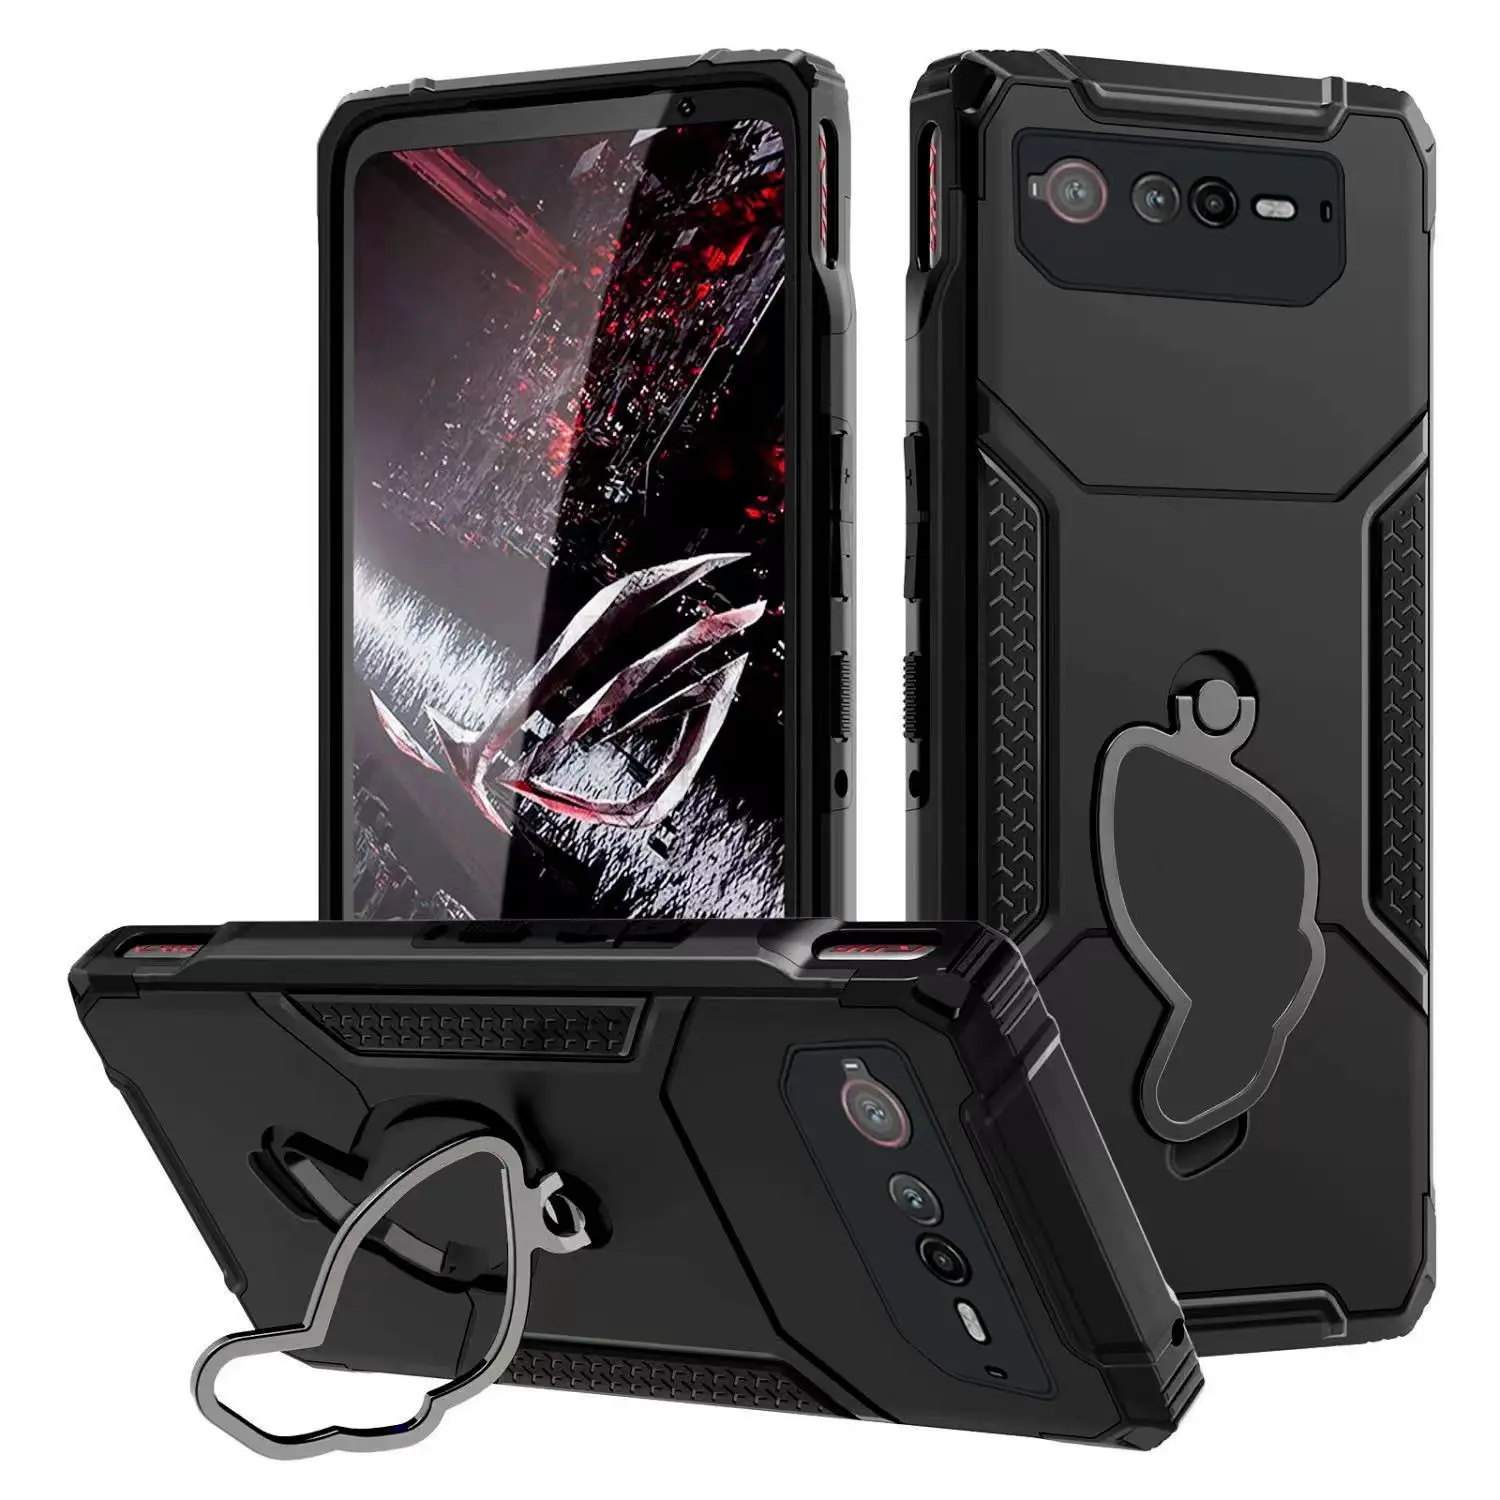 

ZSHOW Armor Case for ASUS ROG Phone 6 7 Case Air Trigger Compatible with Kickstand Dust Plug Drop Protection for ROG Phone 6 7